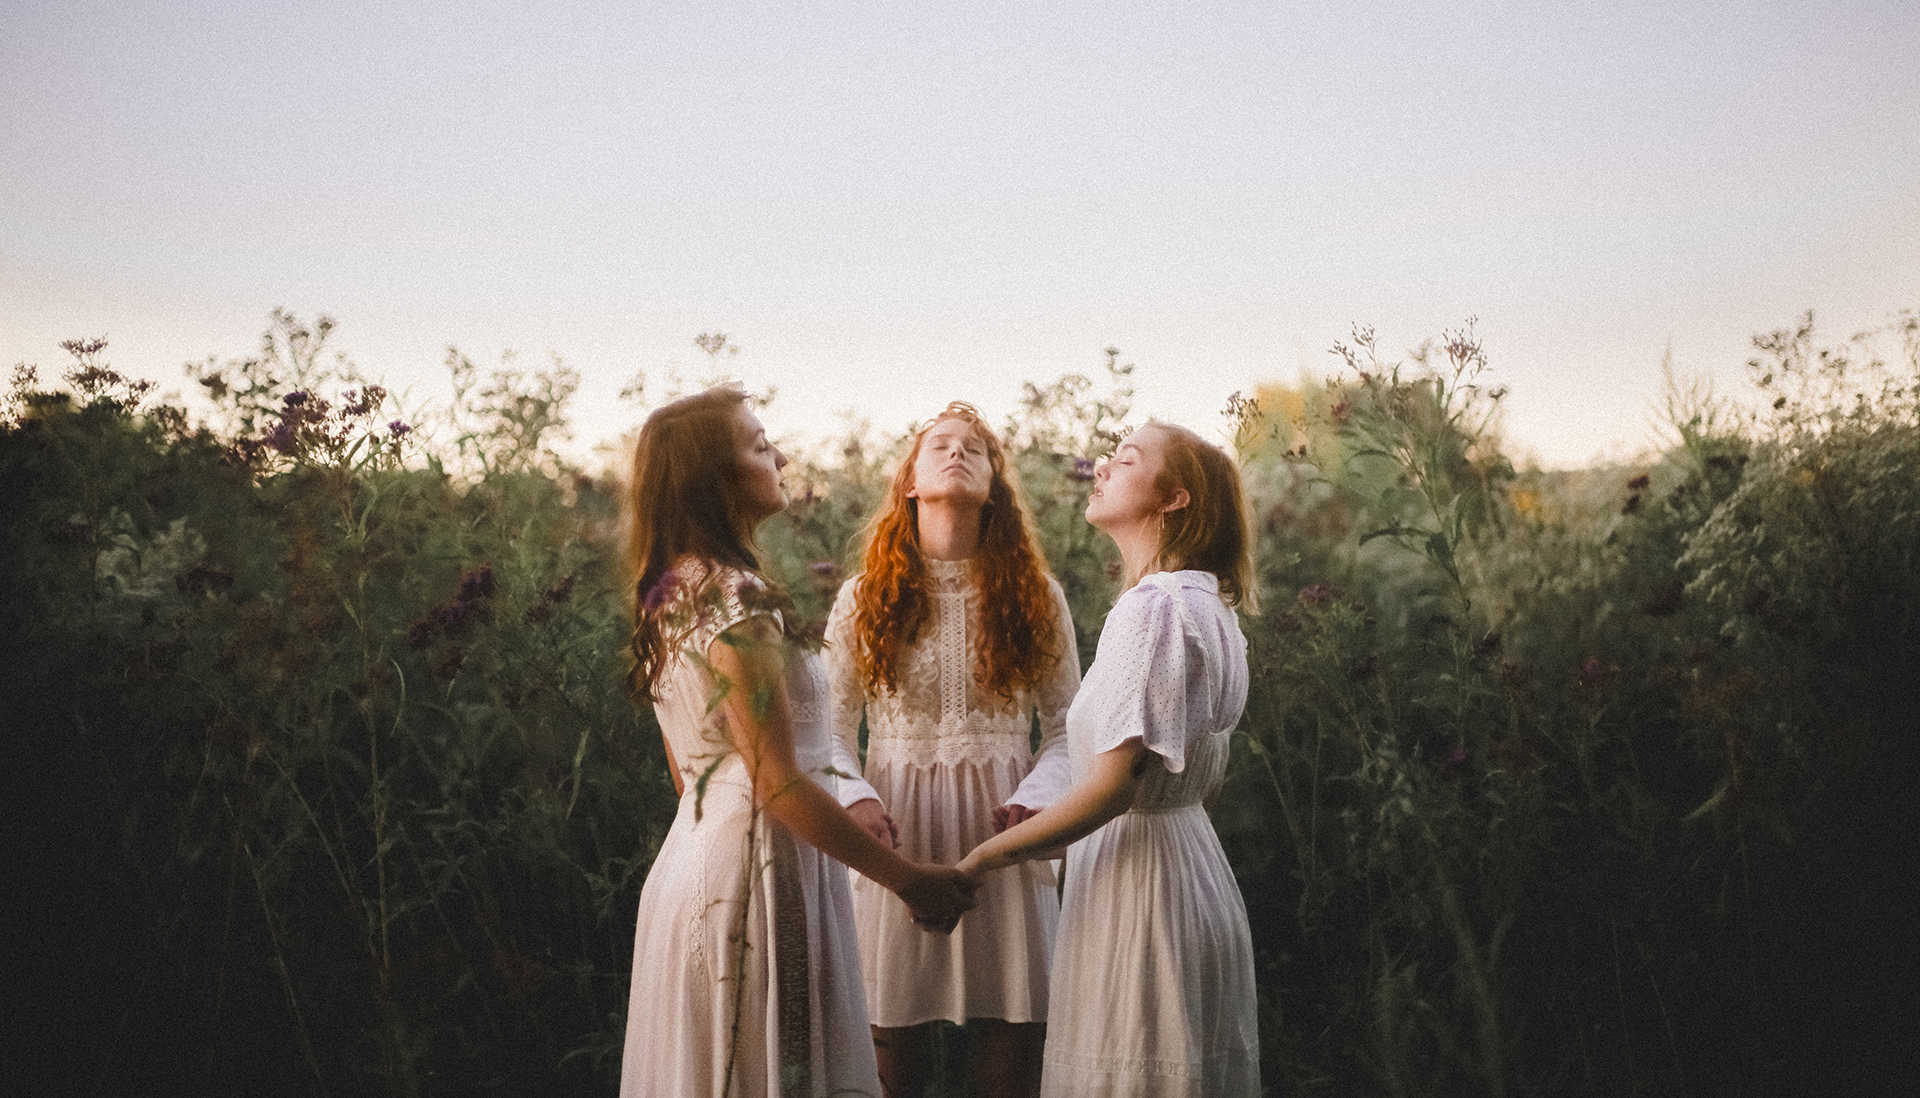 3 women praying together in a field